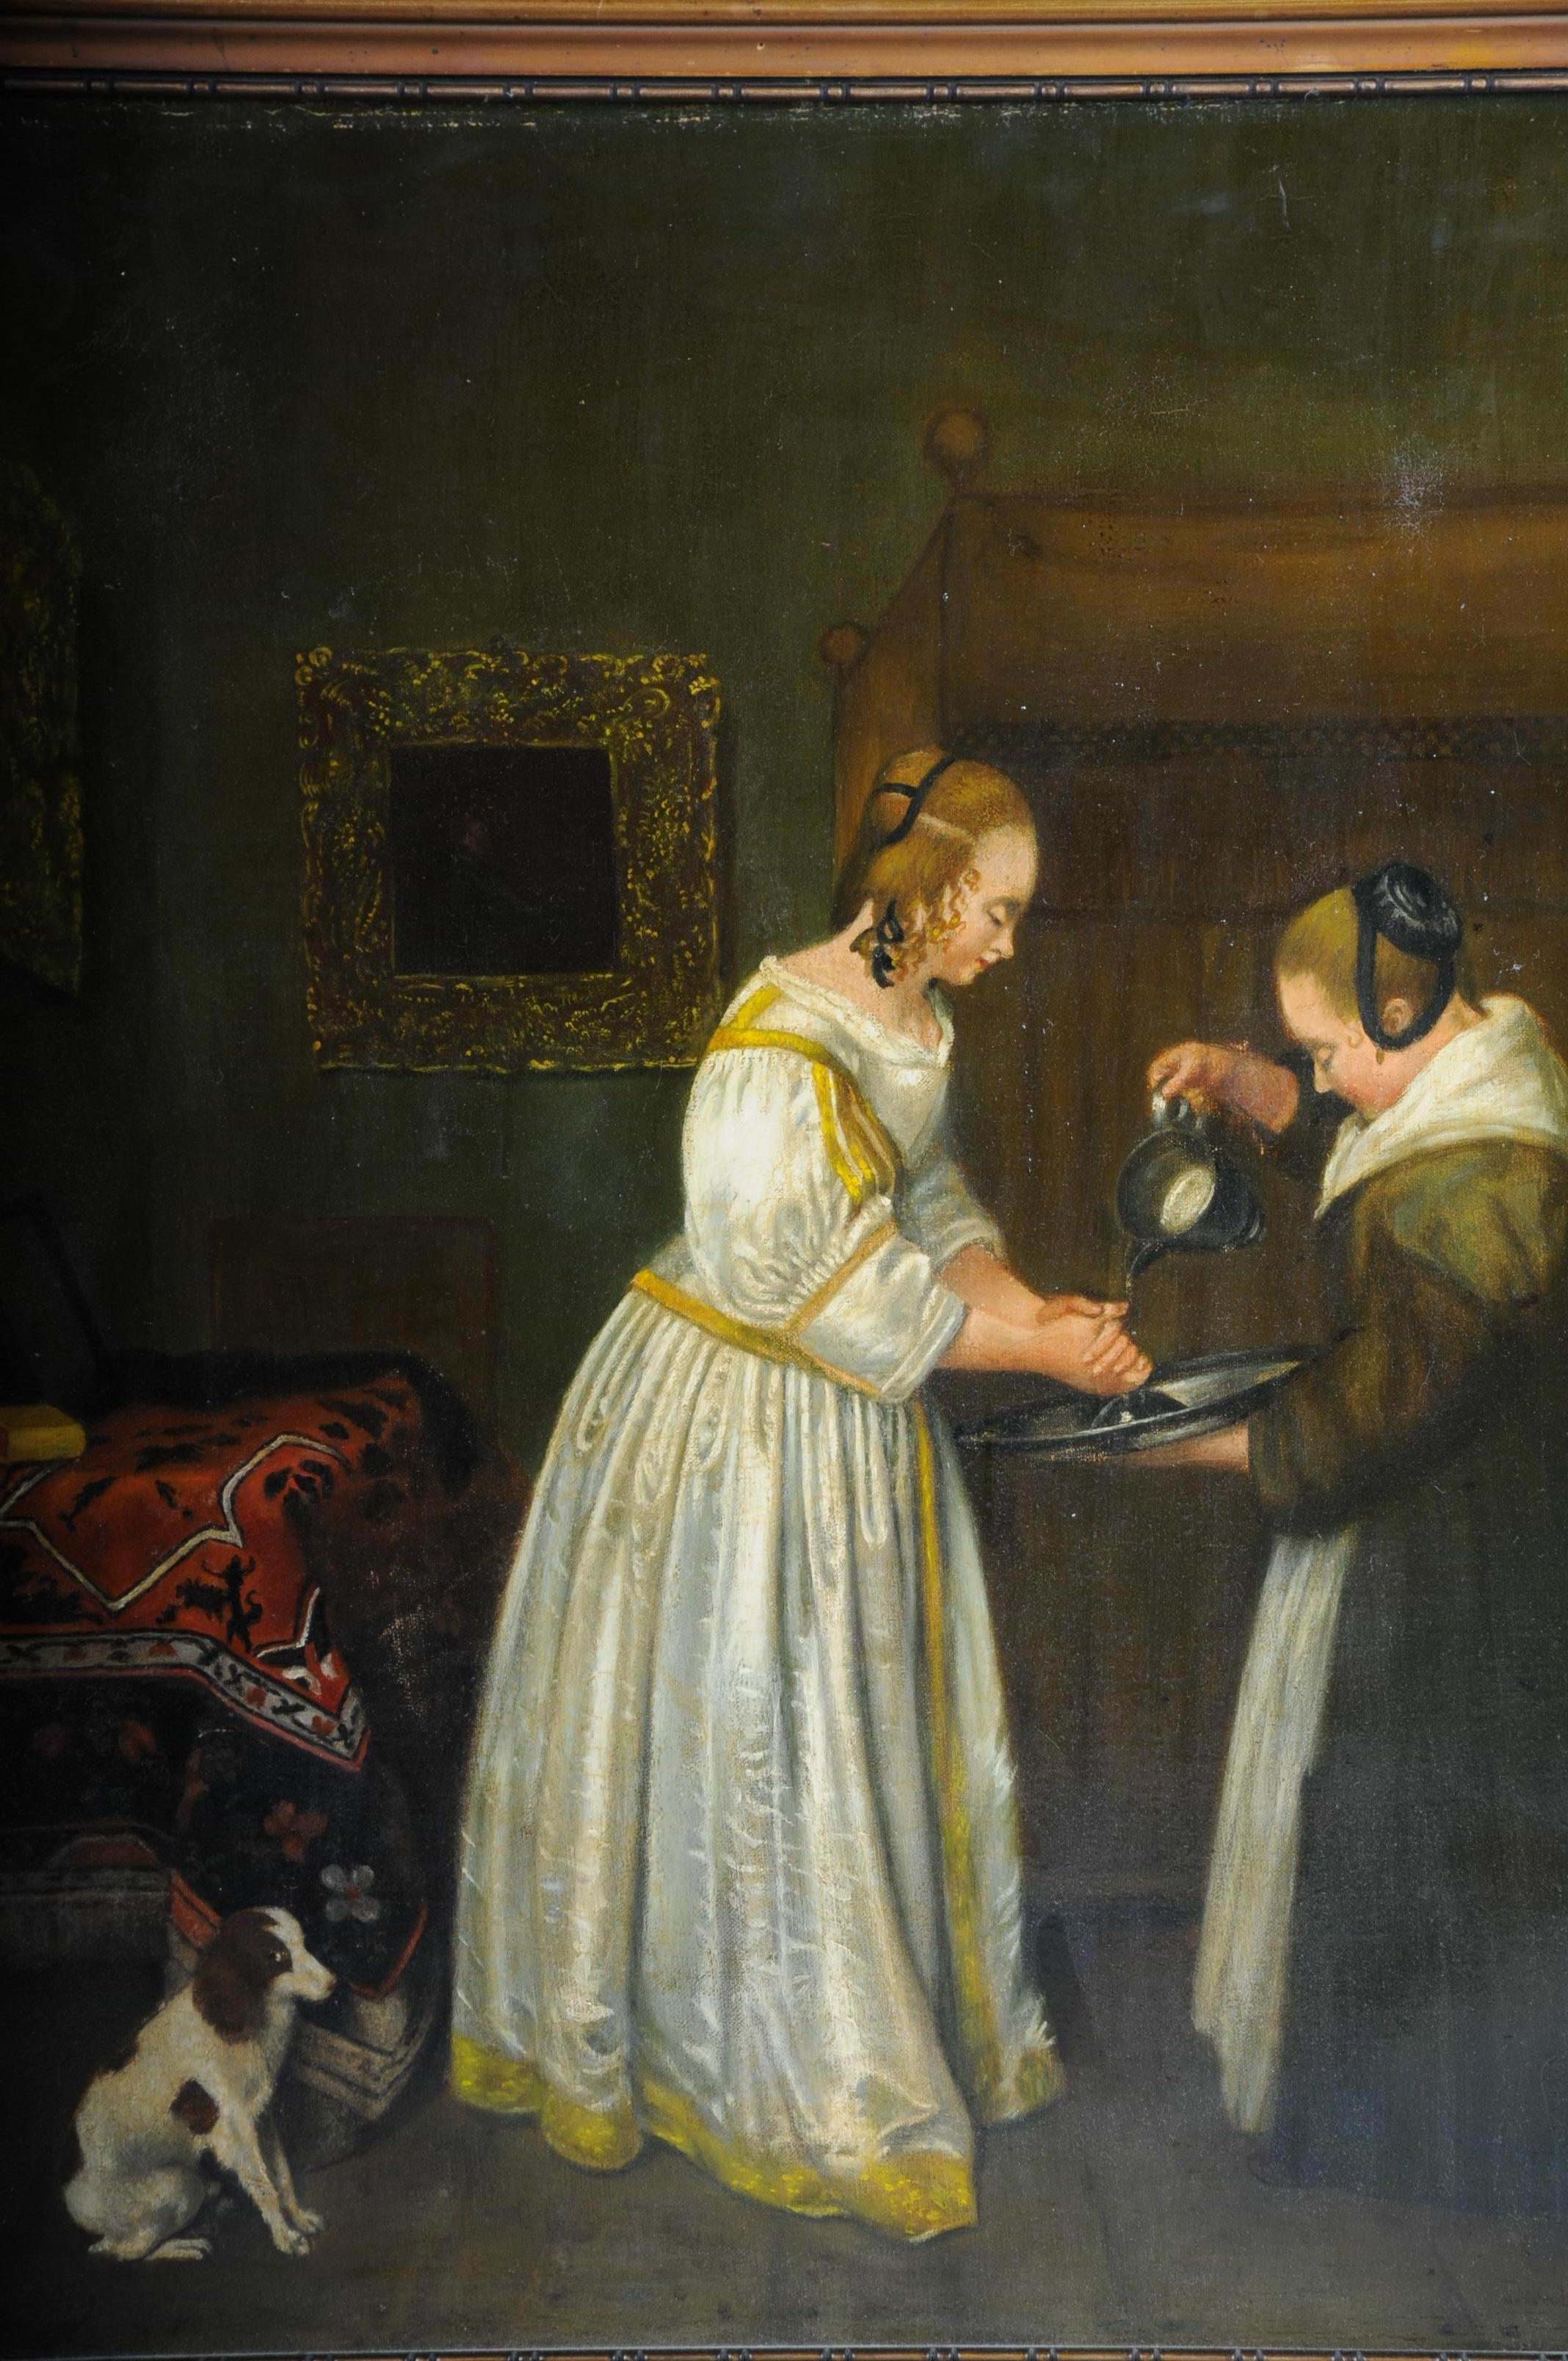 Old oil painting after J. Vermeer manner, old master, circa 1900

Oil on canvas. Hand painted in the manner of J. Vermeer. High quality painter depicting a landlady who has a servant wash her hands. A domestic dog is sitting behind her.